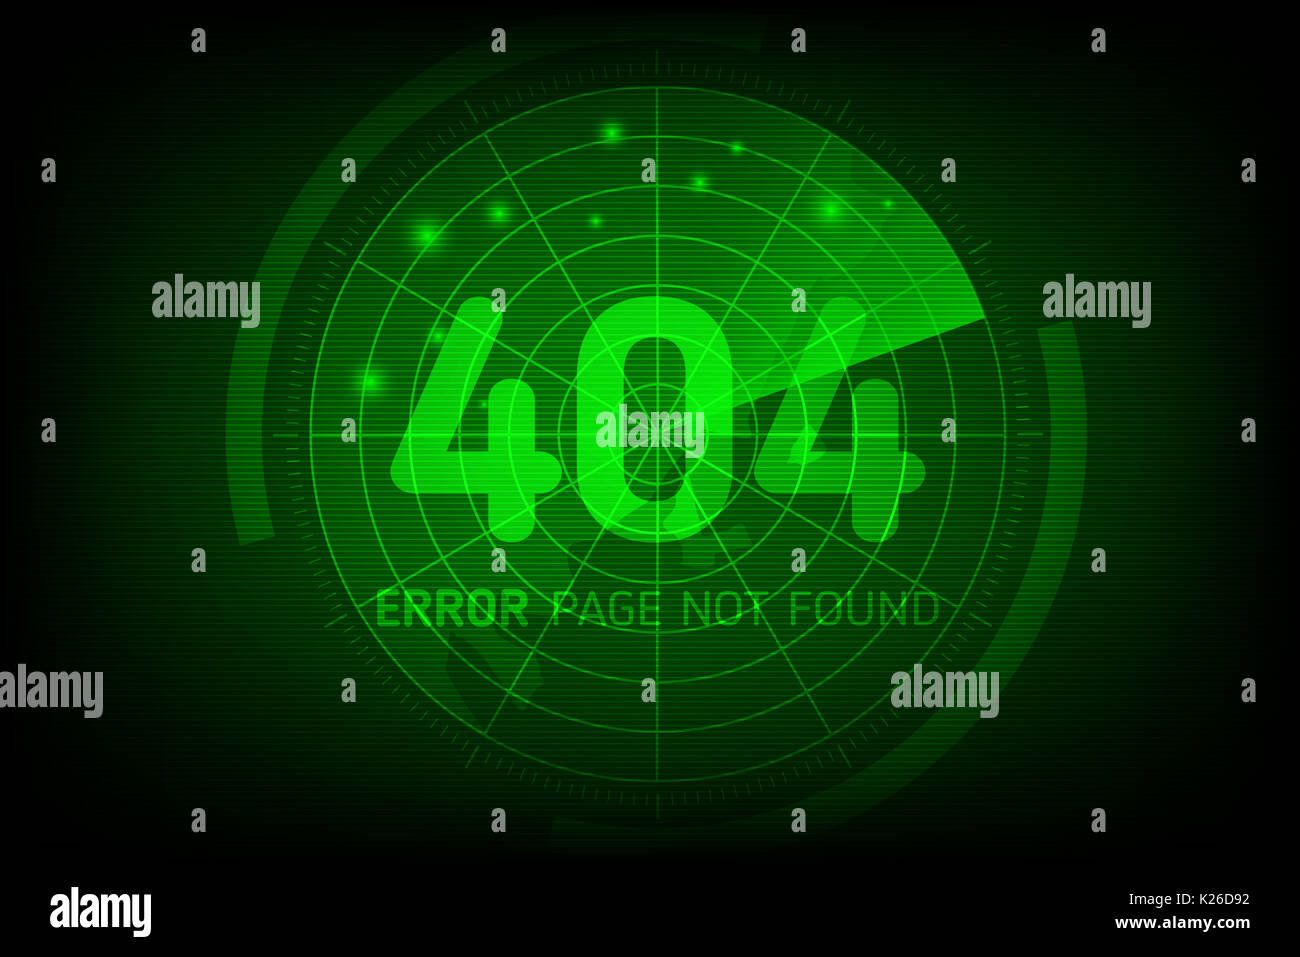 404 error not found page in style scan radar Stock Photo